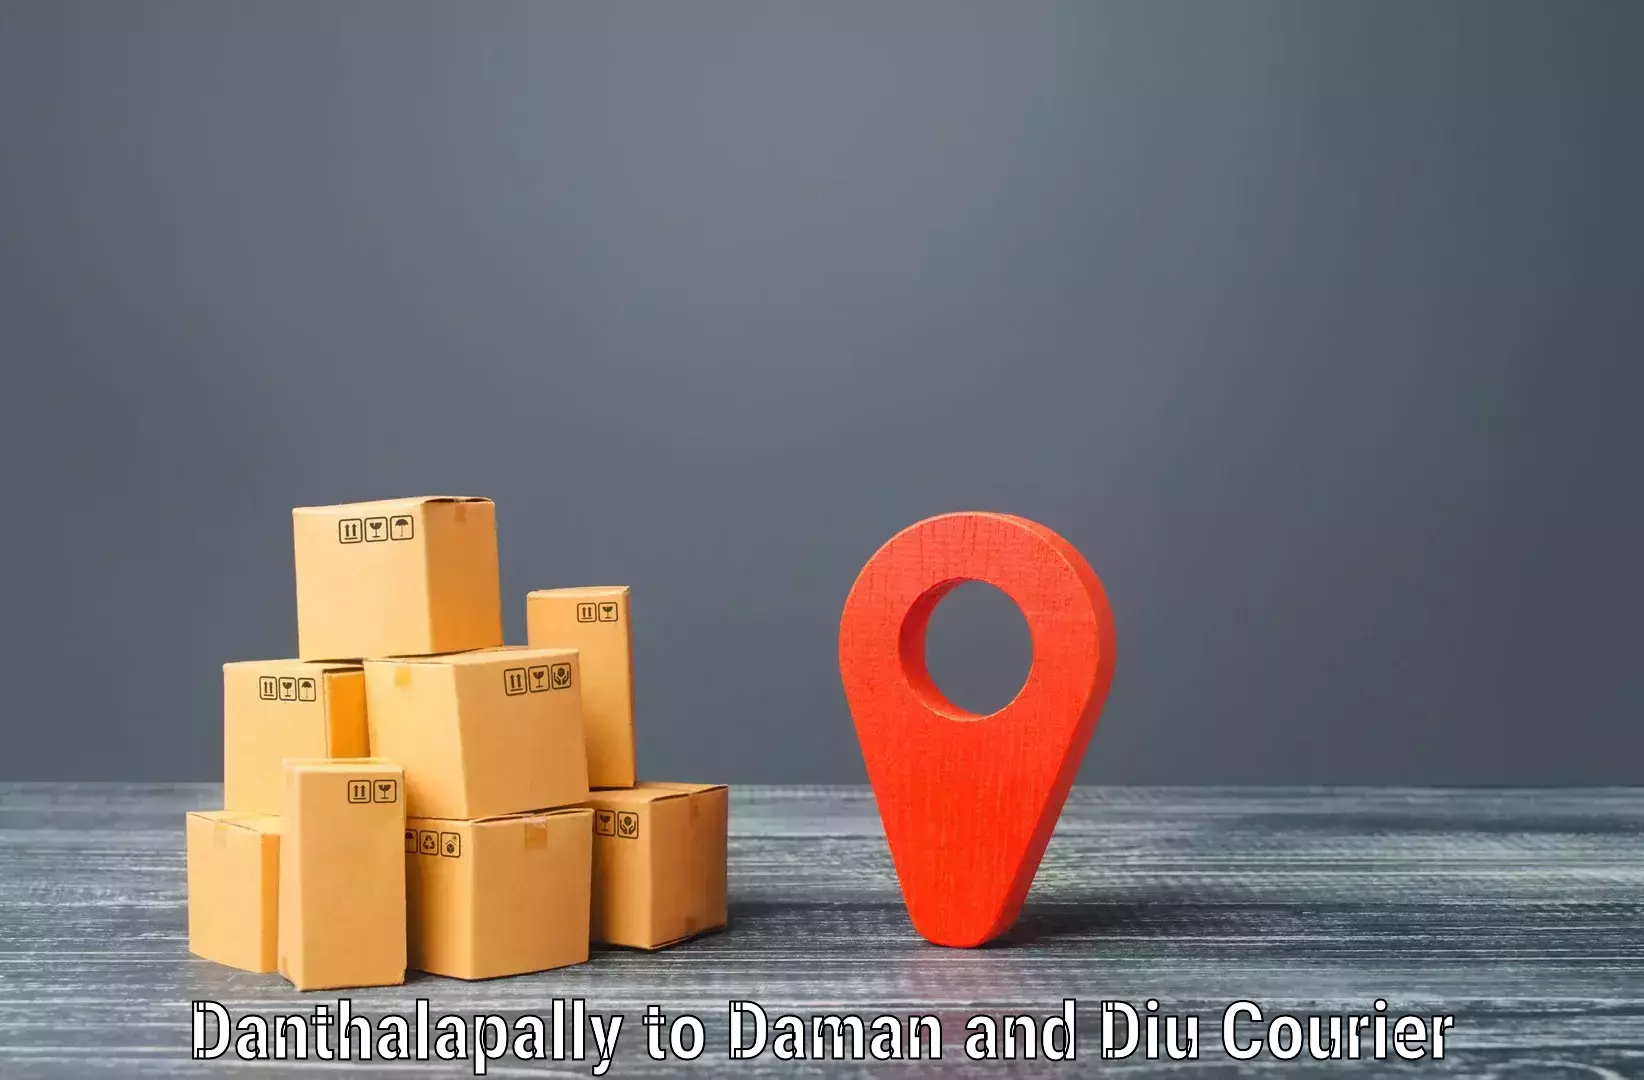 Courier service partnerships Danthalapally to Daman